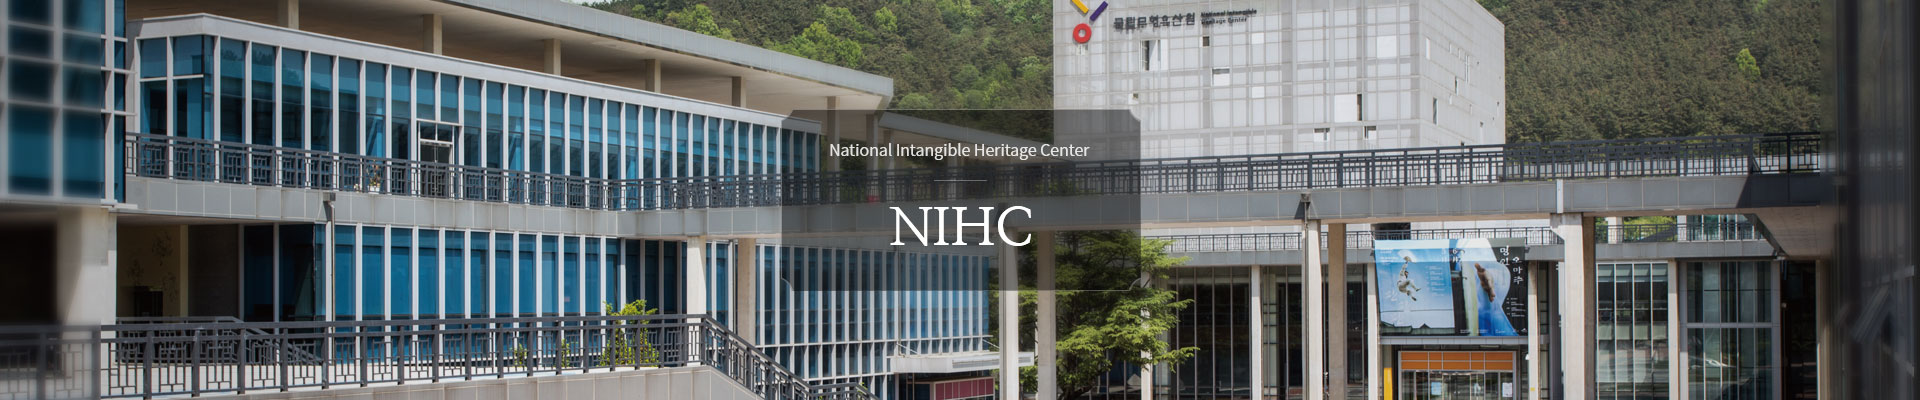 National Intangible Heritage Center, NIHC